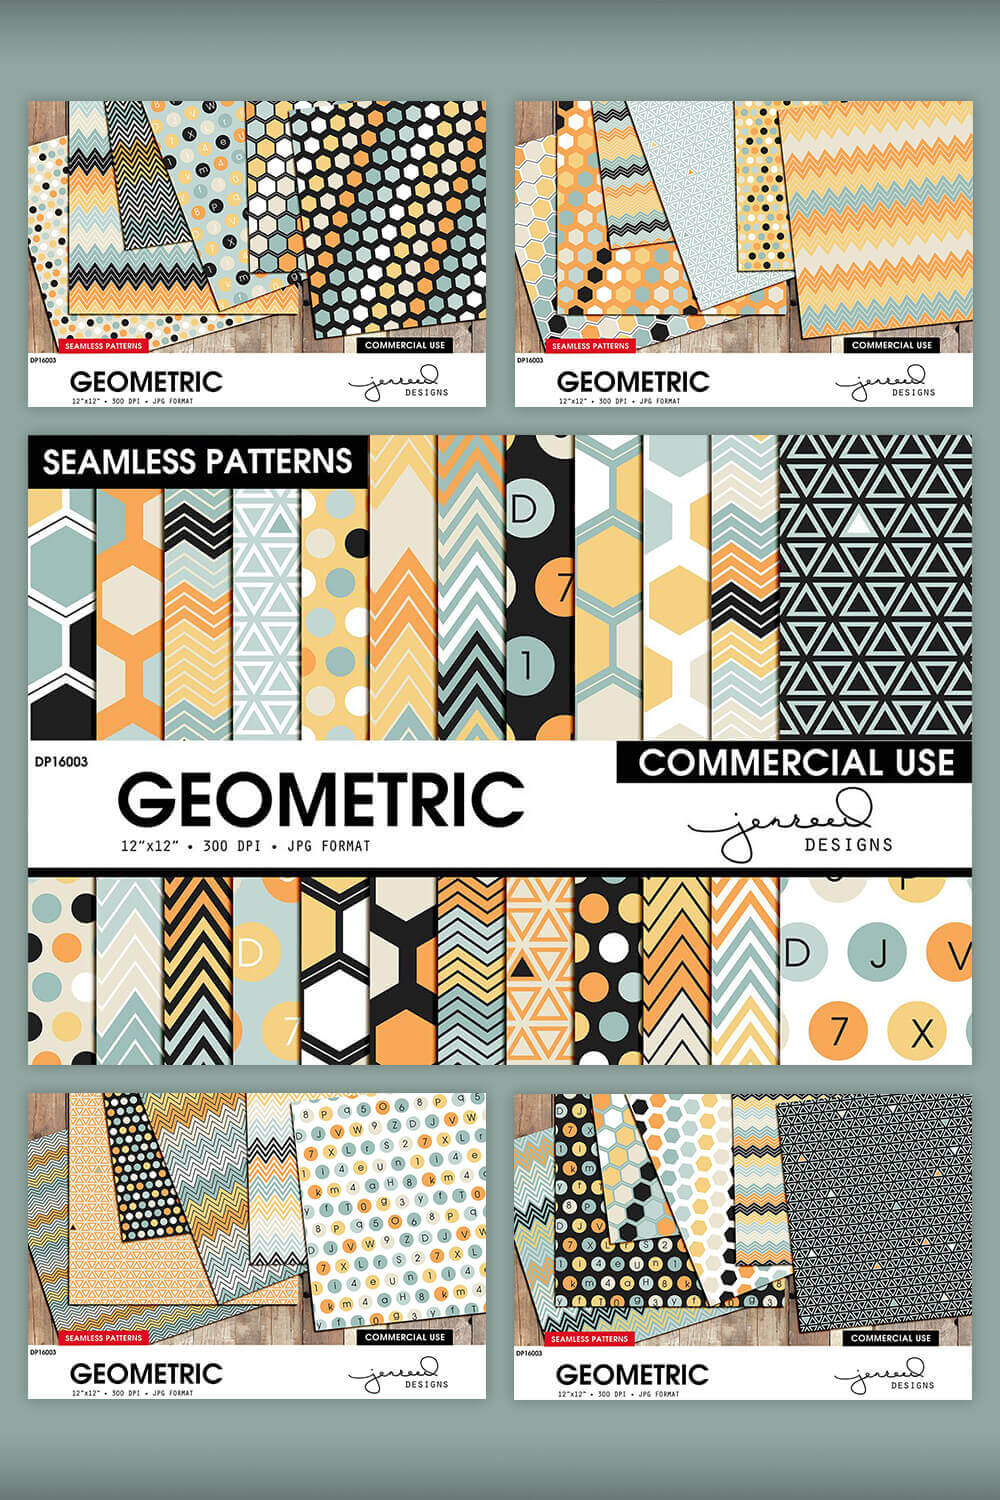 Geometric Seamless Patterns for Commercial Use.